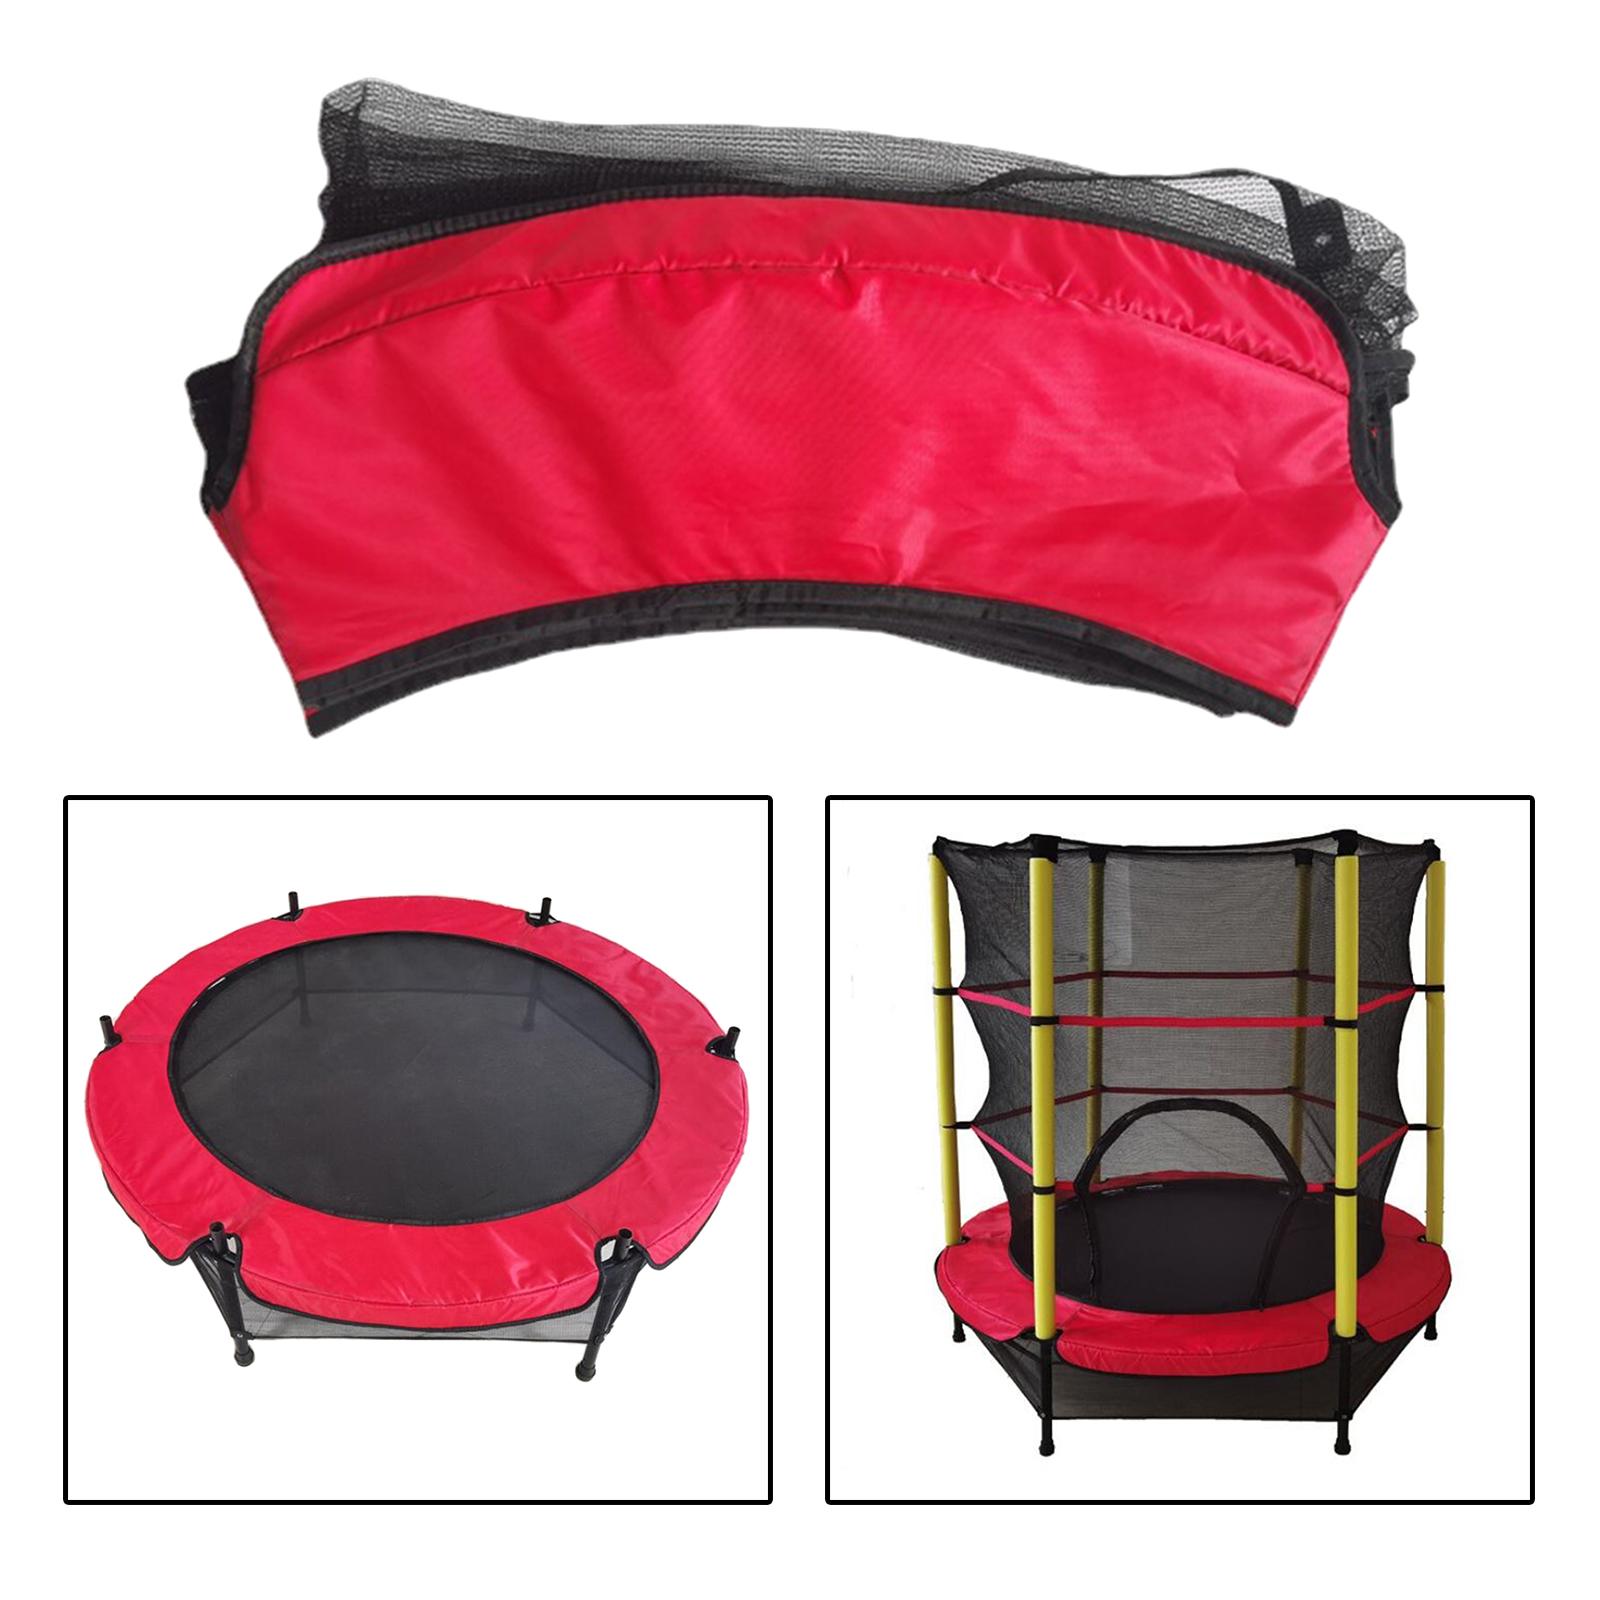 Trampoline Safety Pad Mat Waterproof Tear Resistant Round for Play Exercise